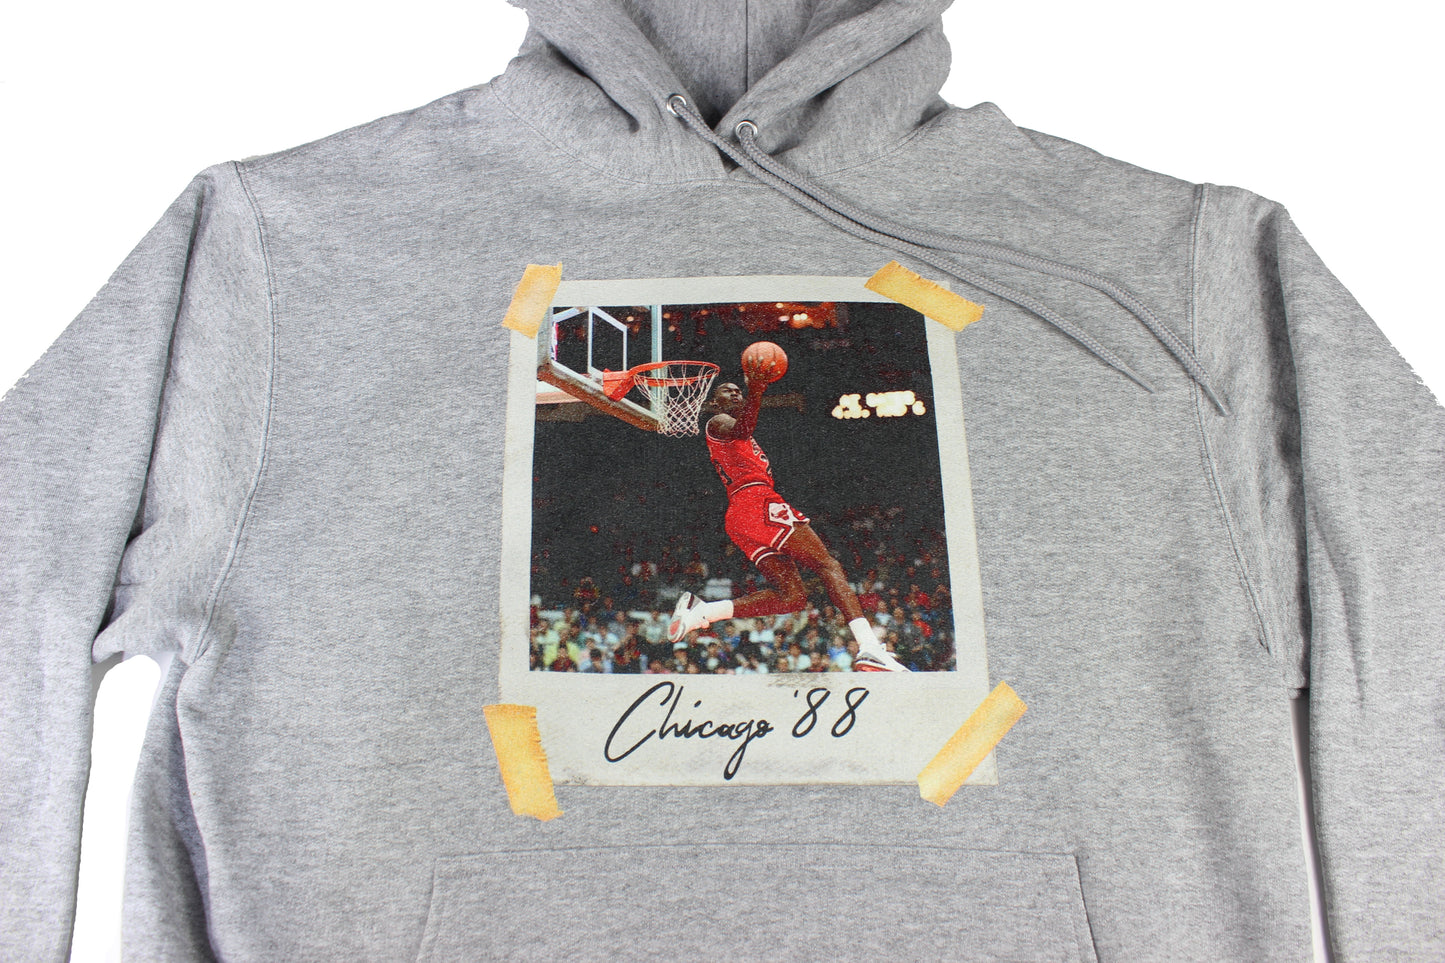 Chicago '88 Hoodie Pay Homage (Grey)